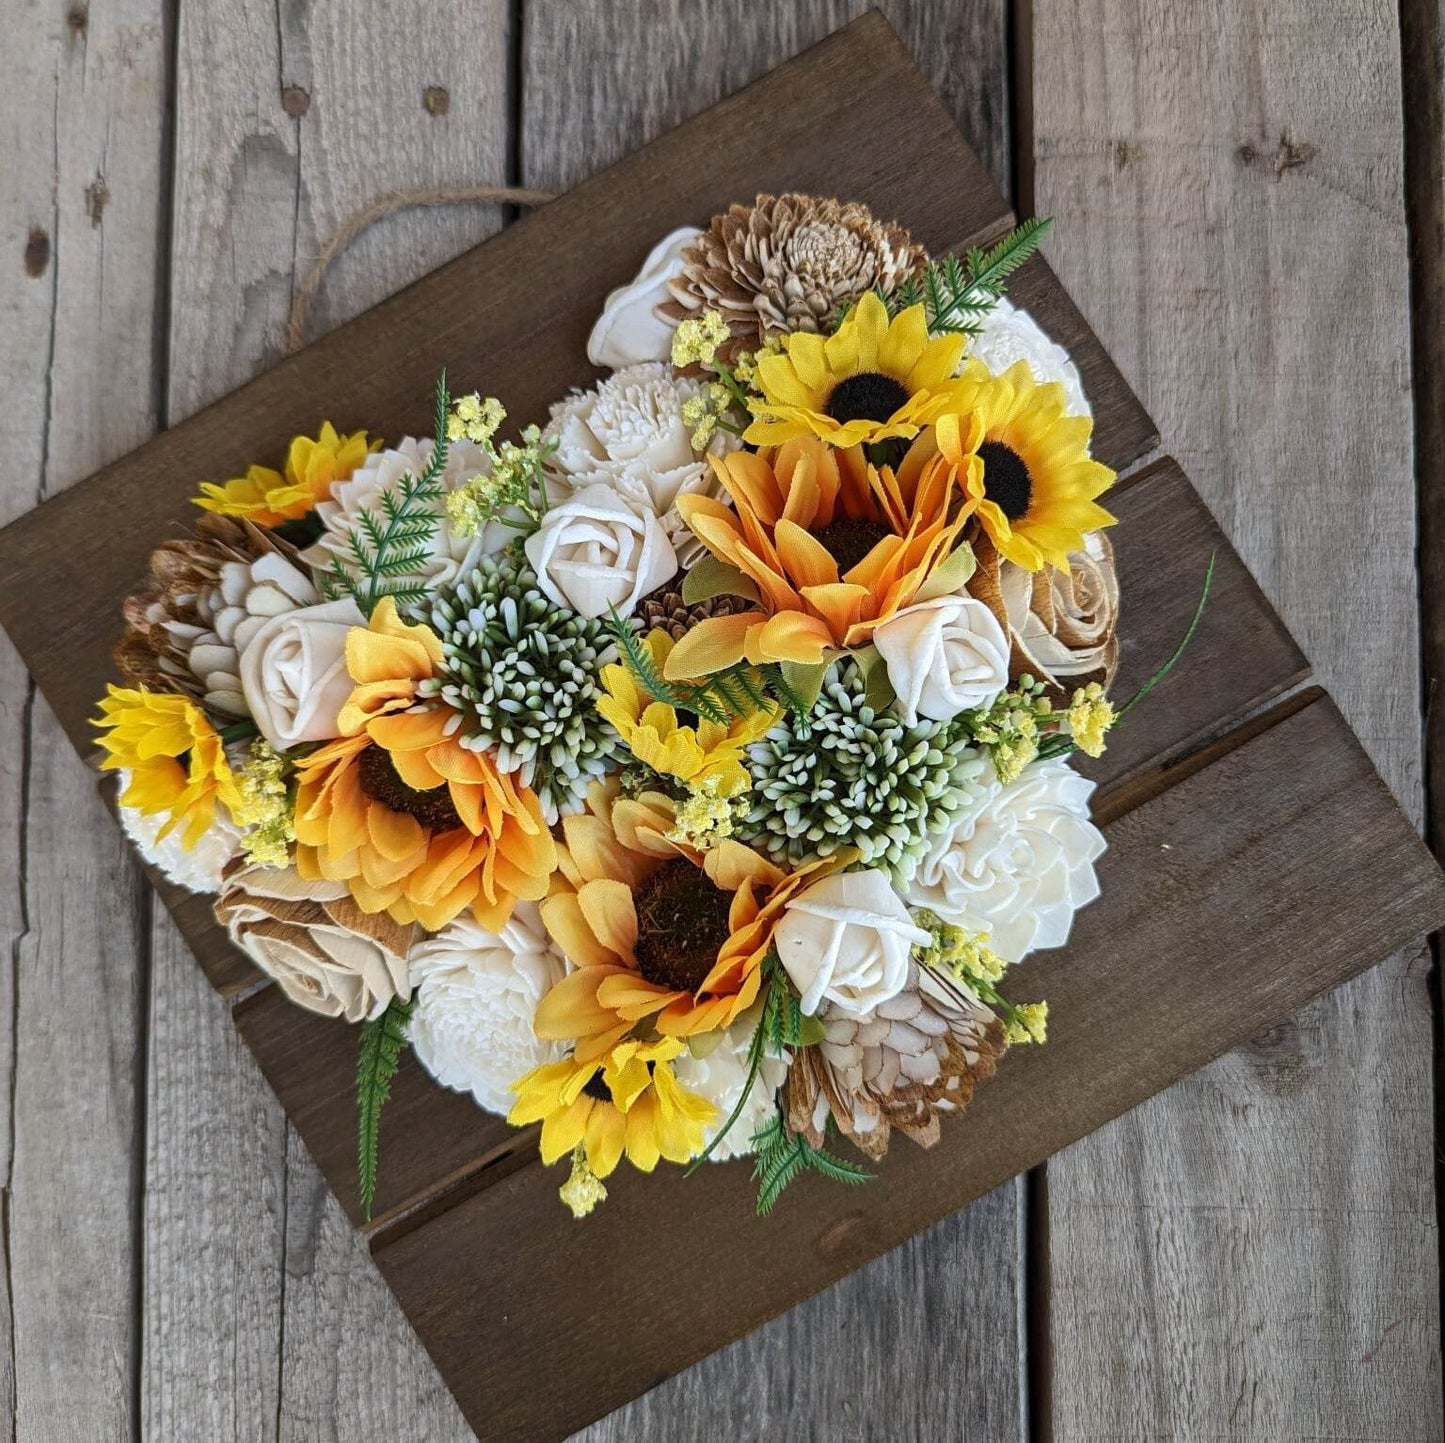 Wood Flower Heart Sign, Wooden Flower Art, Heart with Wood Flowers, Sunflower Home Decor, Thinking of You Floral Arrangement, Mother's Day